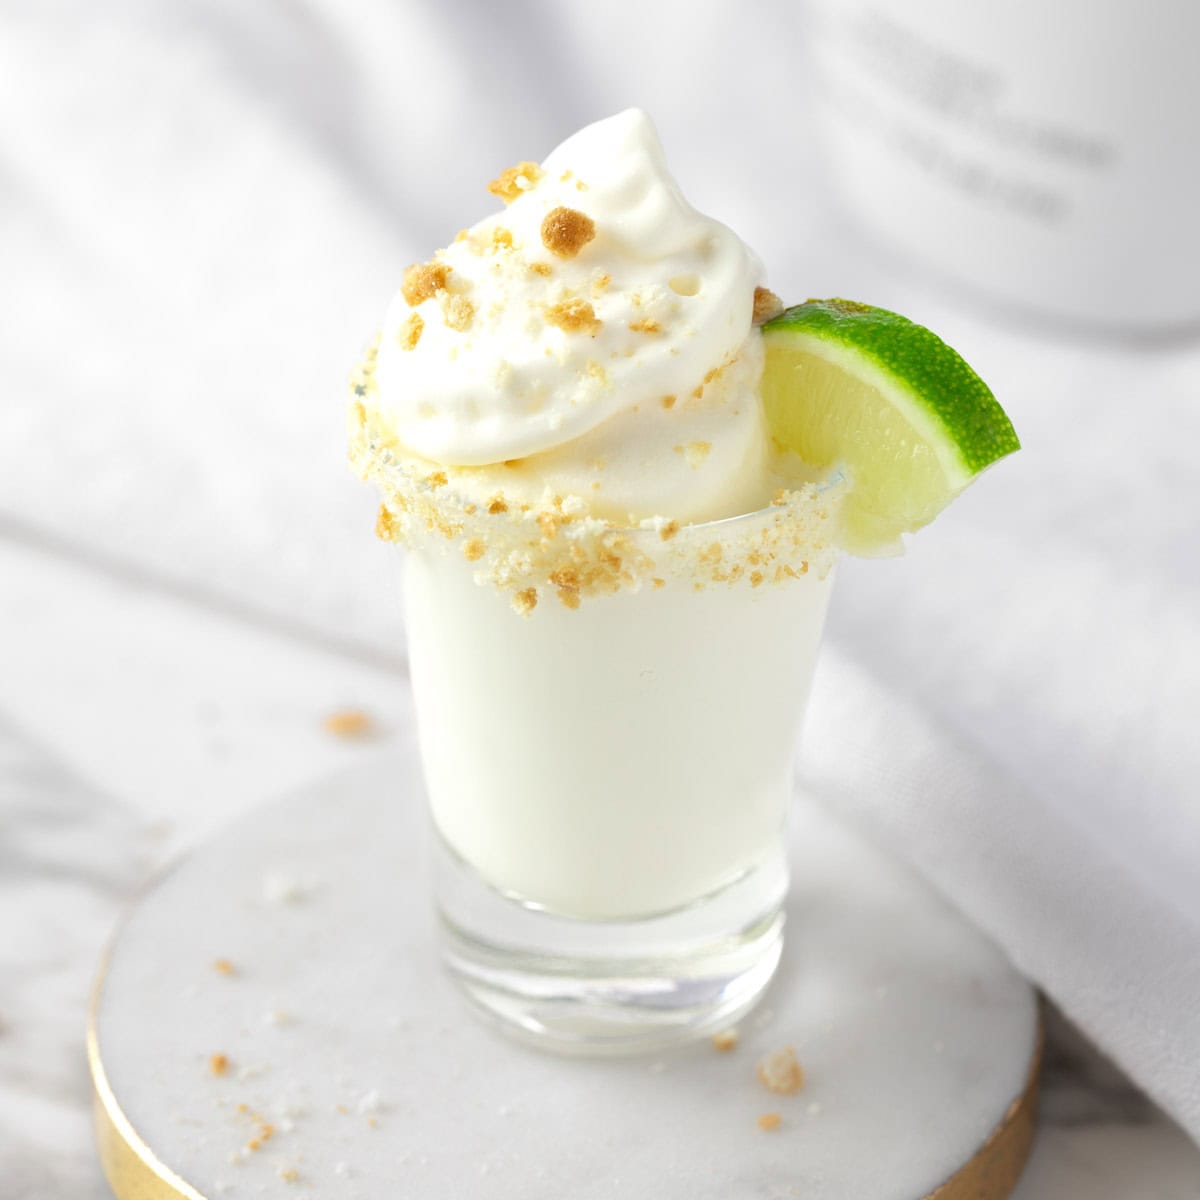 A key lime pie shot topped with whipped cream and graham cracker crumbs.